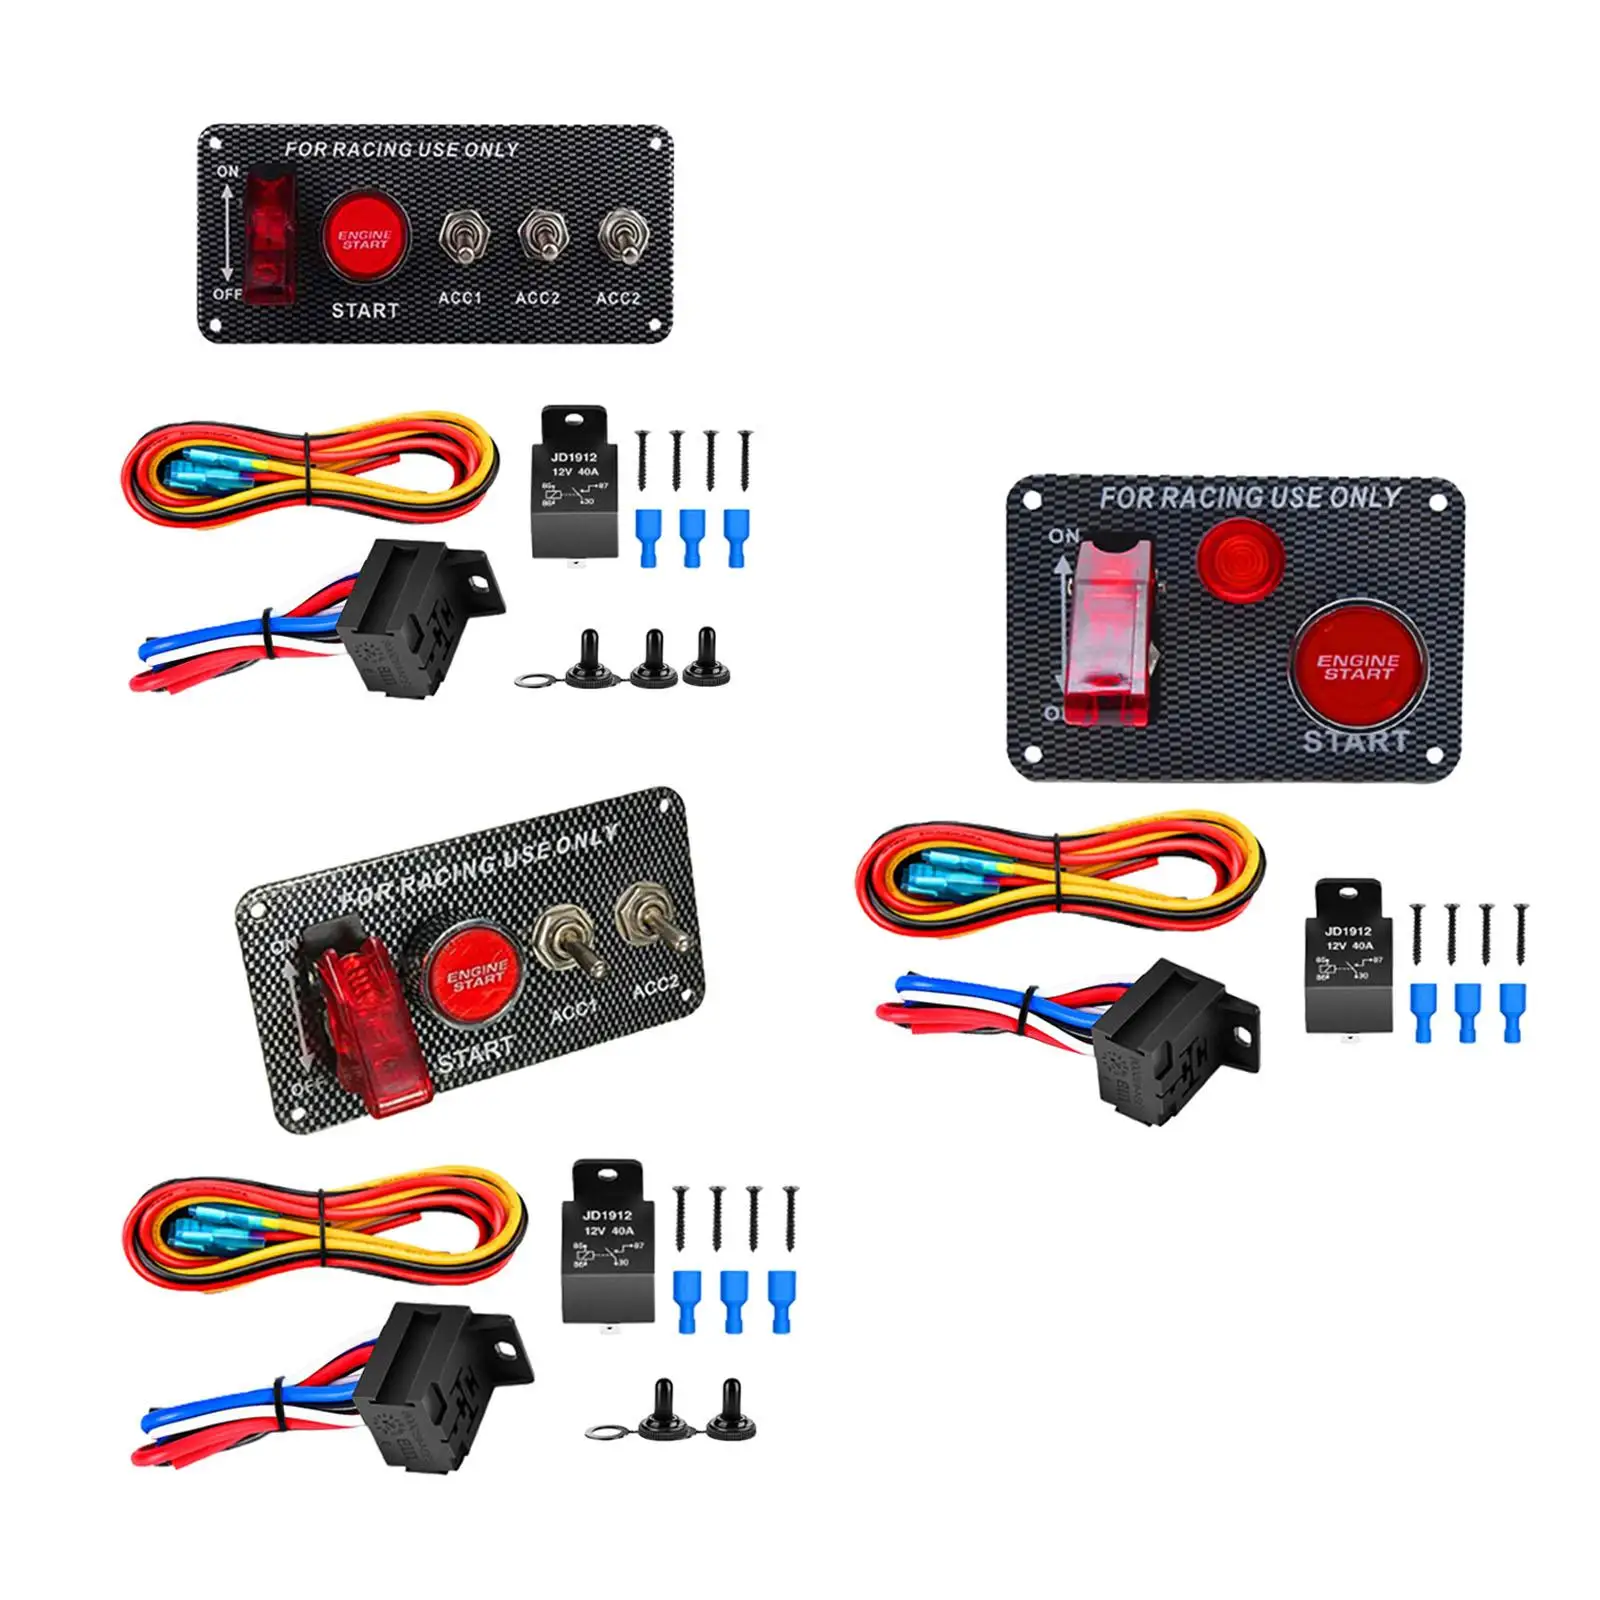 Ignition Switch Panel Car Accessory for 12V Vehicle Caravans